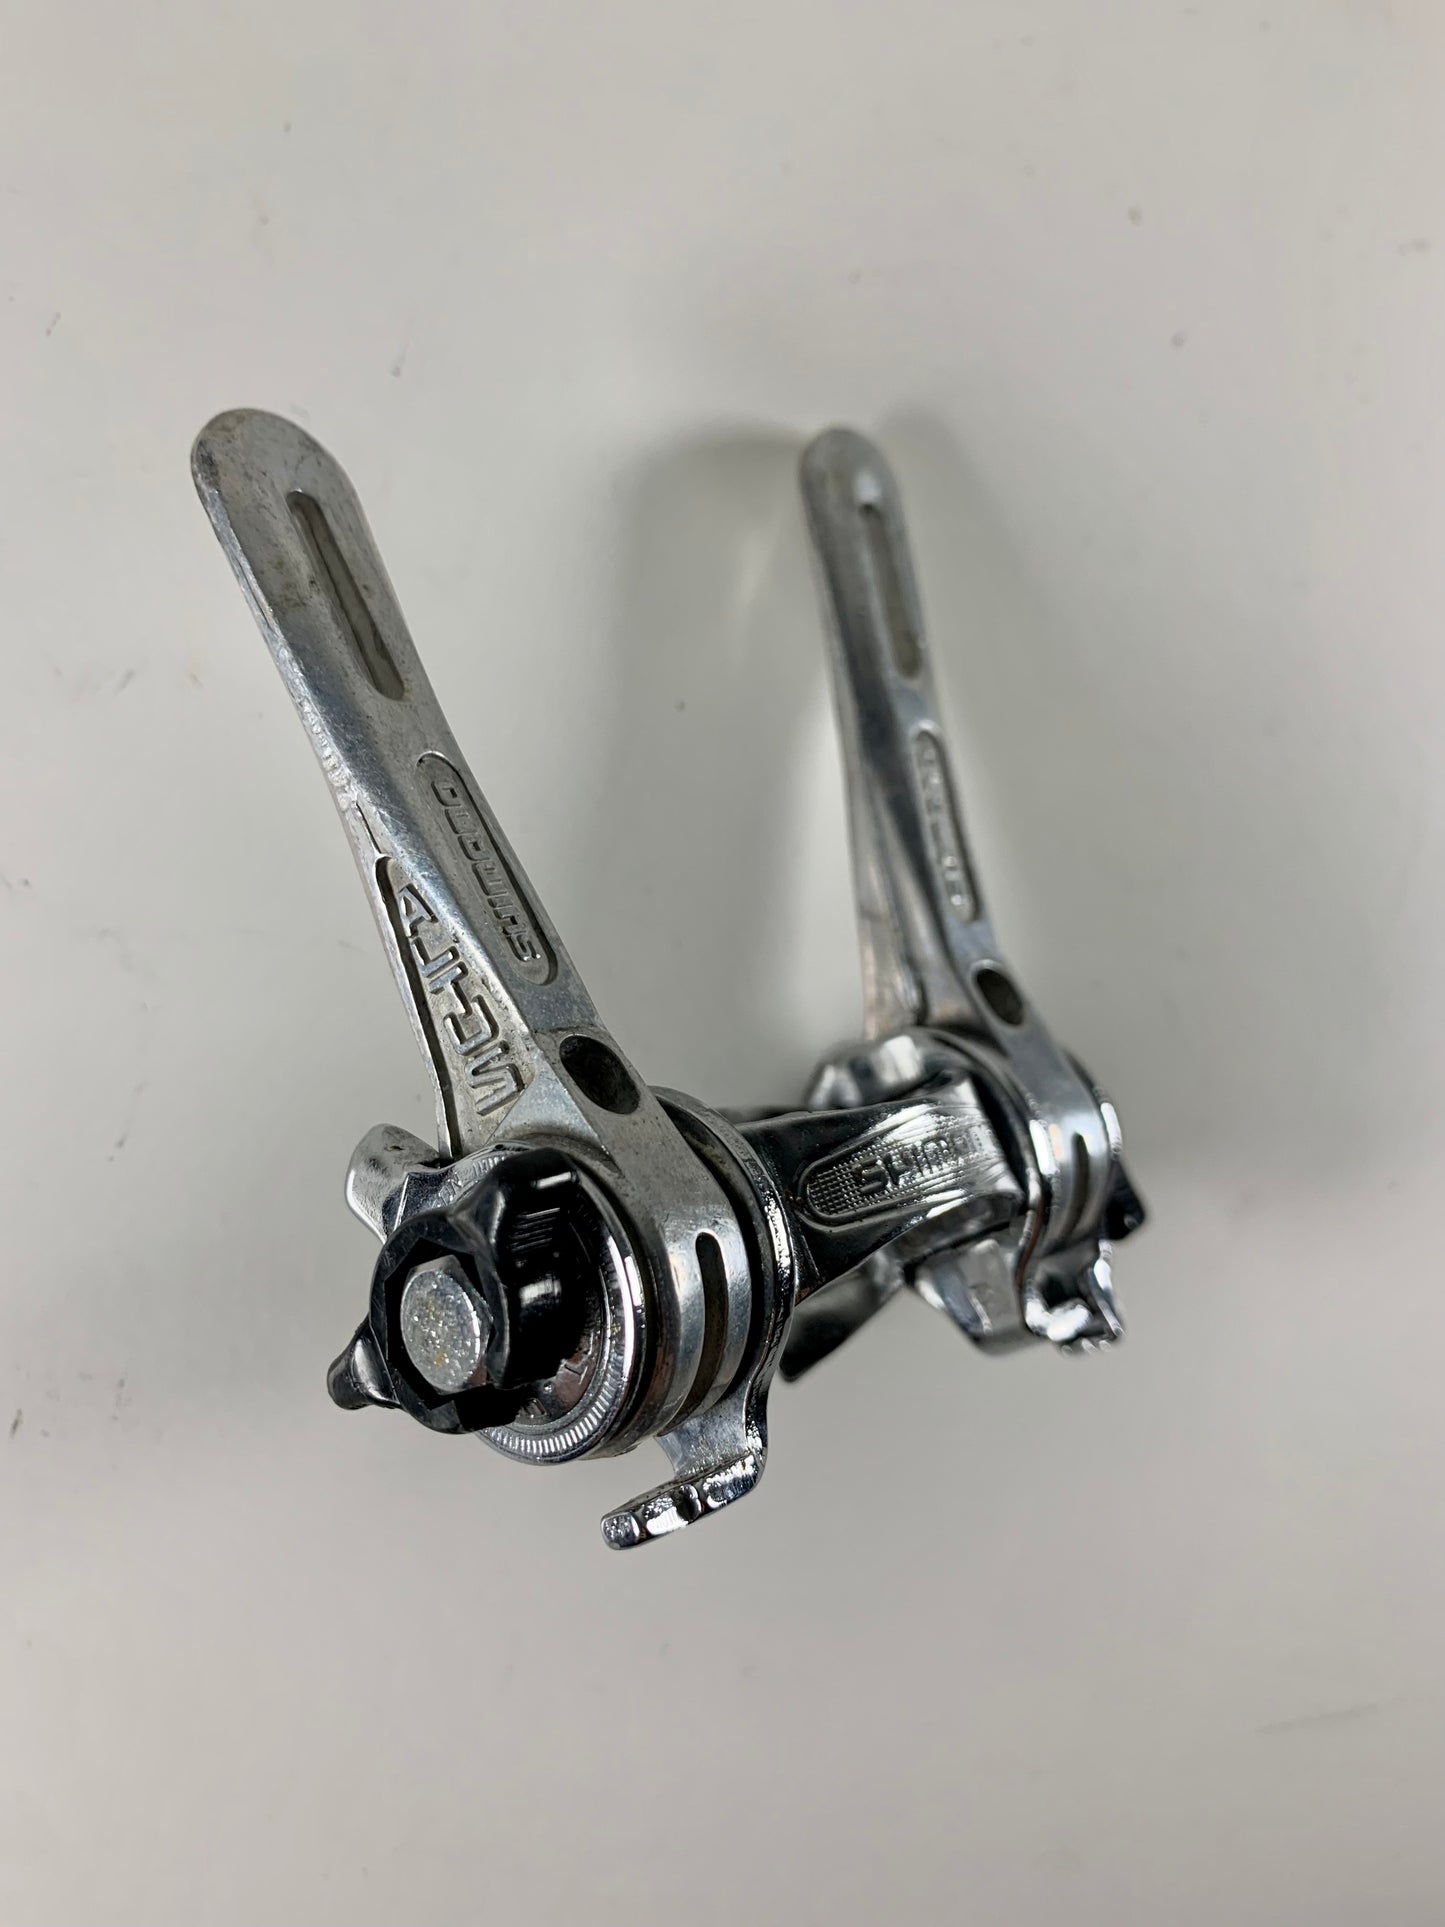 Shimano Altus clamp-on friction shifters